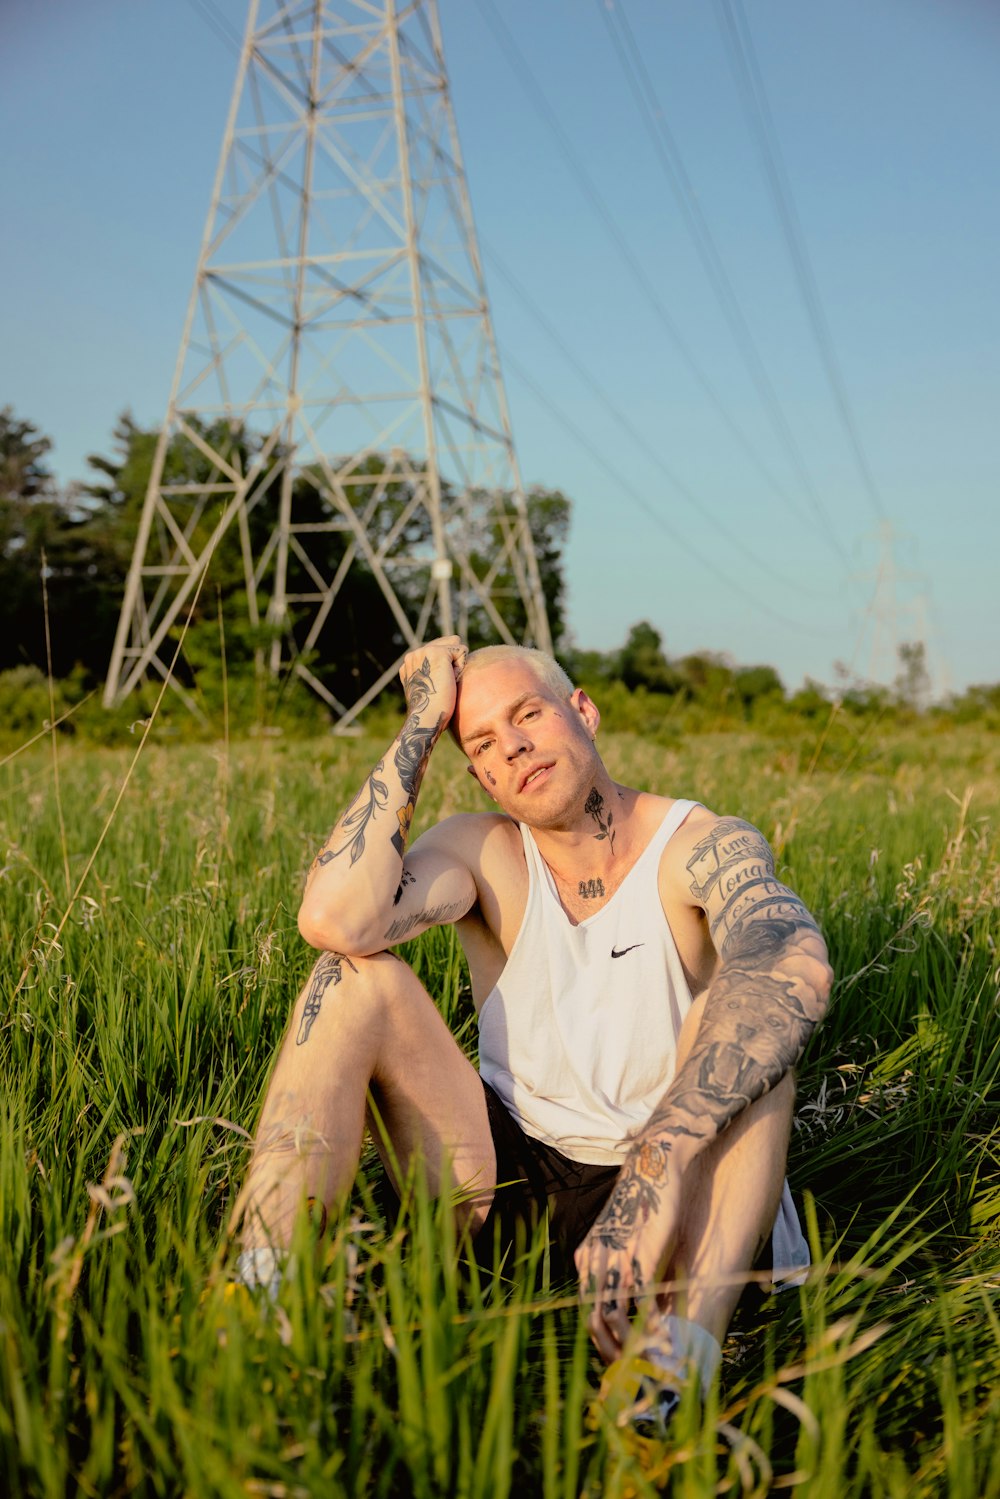 a man with tattoos sitting in the grass